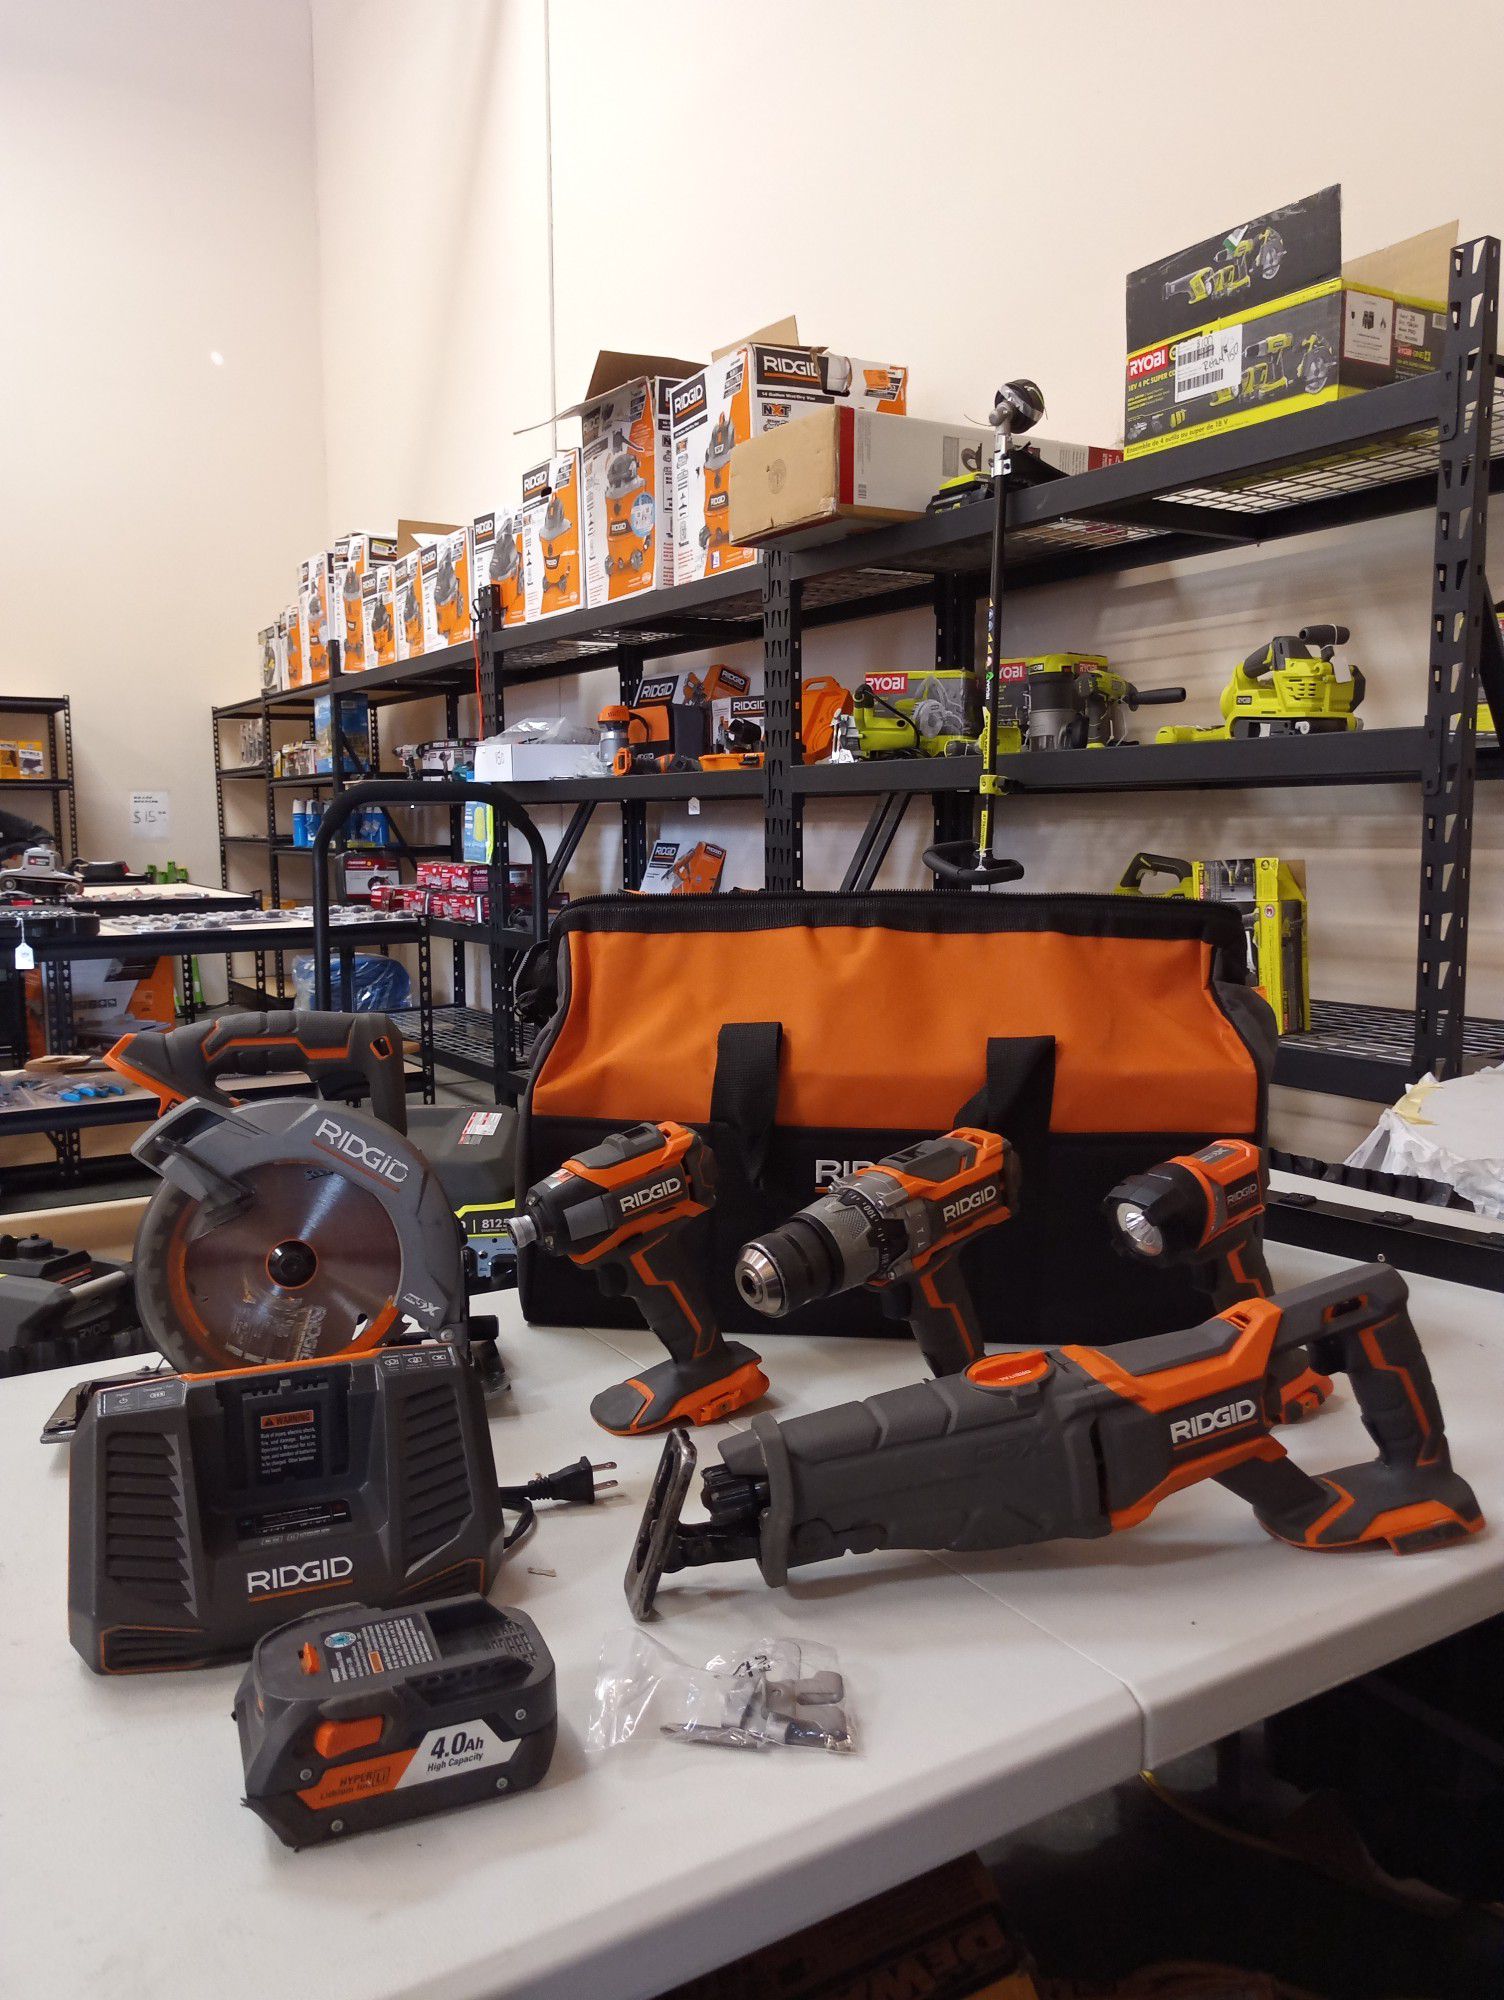 USED IN GREAT CONDITION WORKING PERFECT! RIDGID 18 VT GEN 5X 5 PIECE SET WITH "ONE" BATTERY AND CHARGER AND BAG